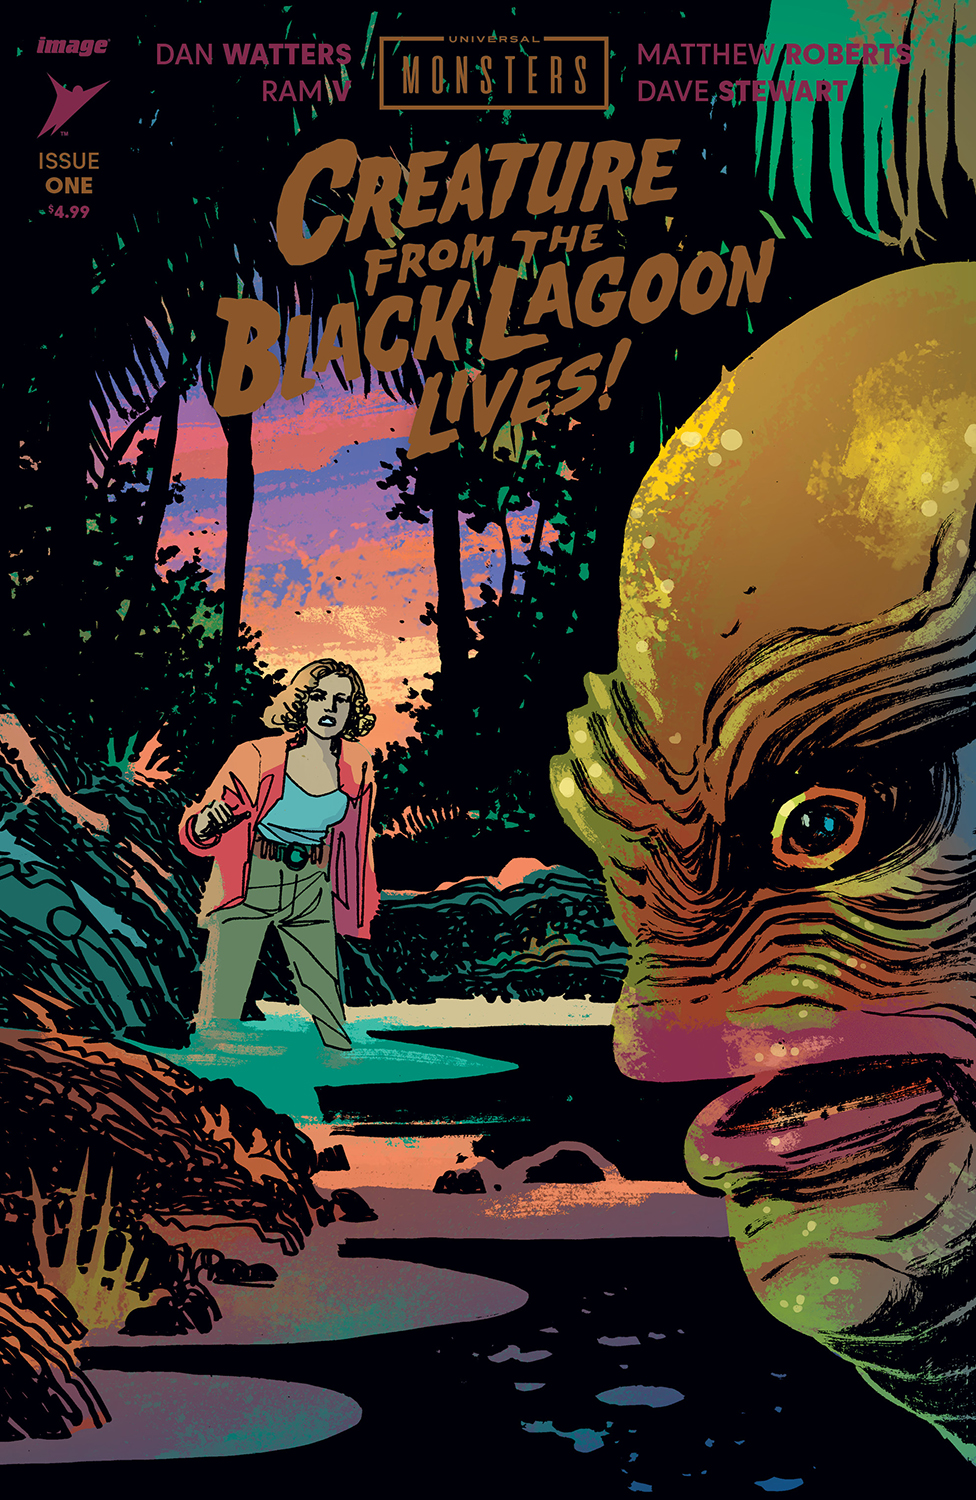 Universal Monsters the Creature from the Black Lagoon Lives #1 Cover C 1 for 10 Incentive Dani Variant (Of 4)